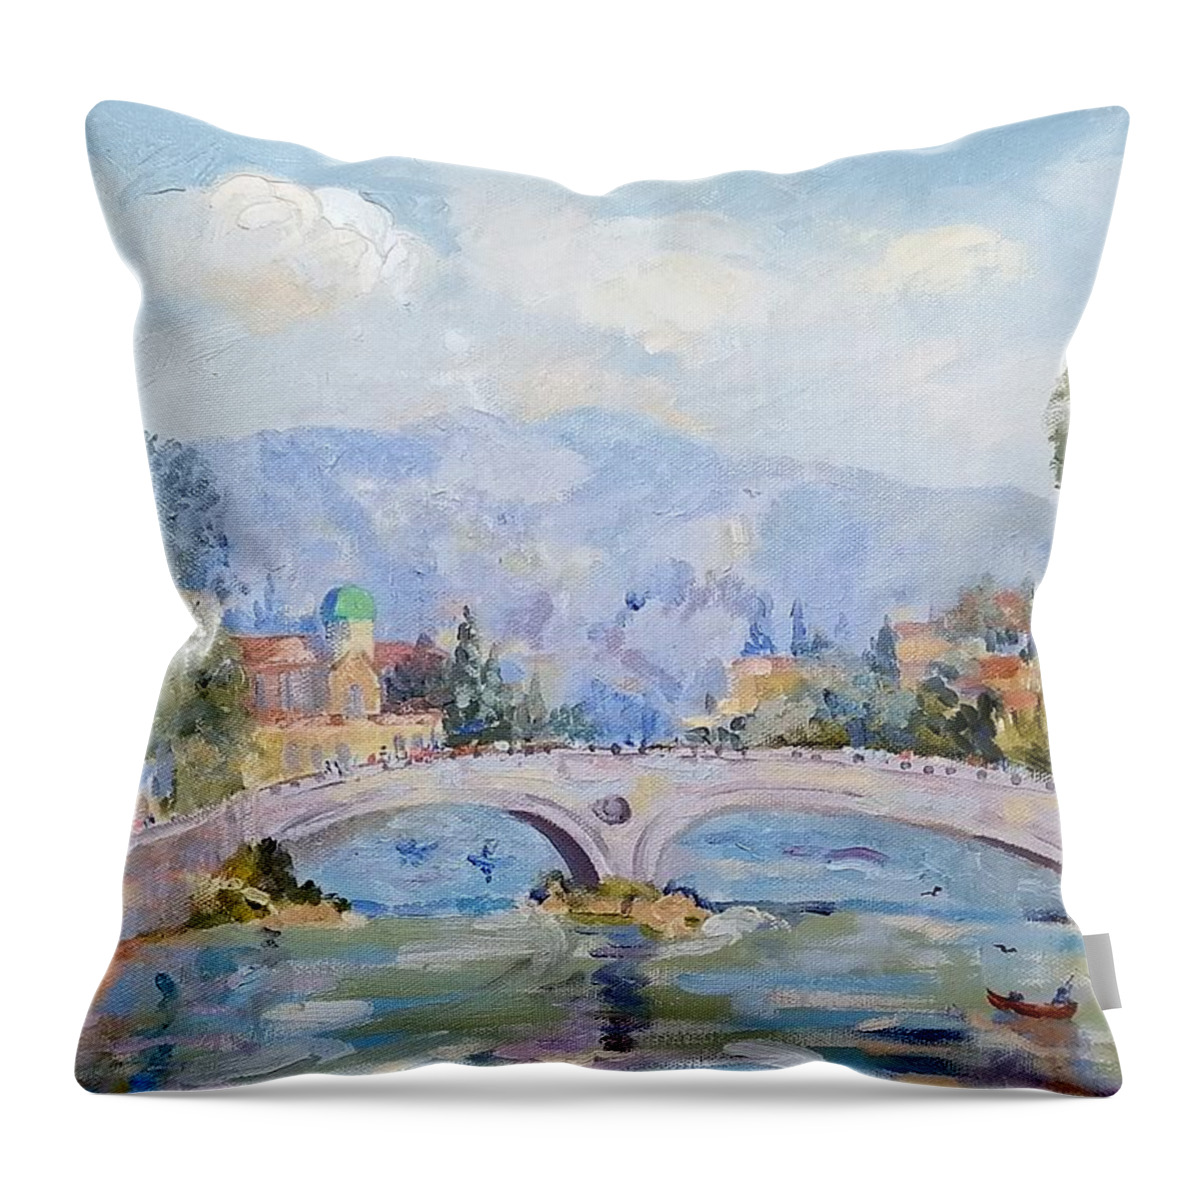 Landscape Throw Pillow featuring the painting Ponte Vittoria Verona by Elinor Fletcher